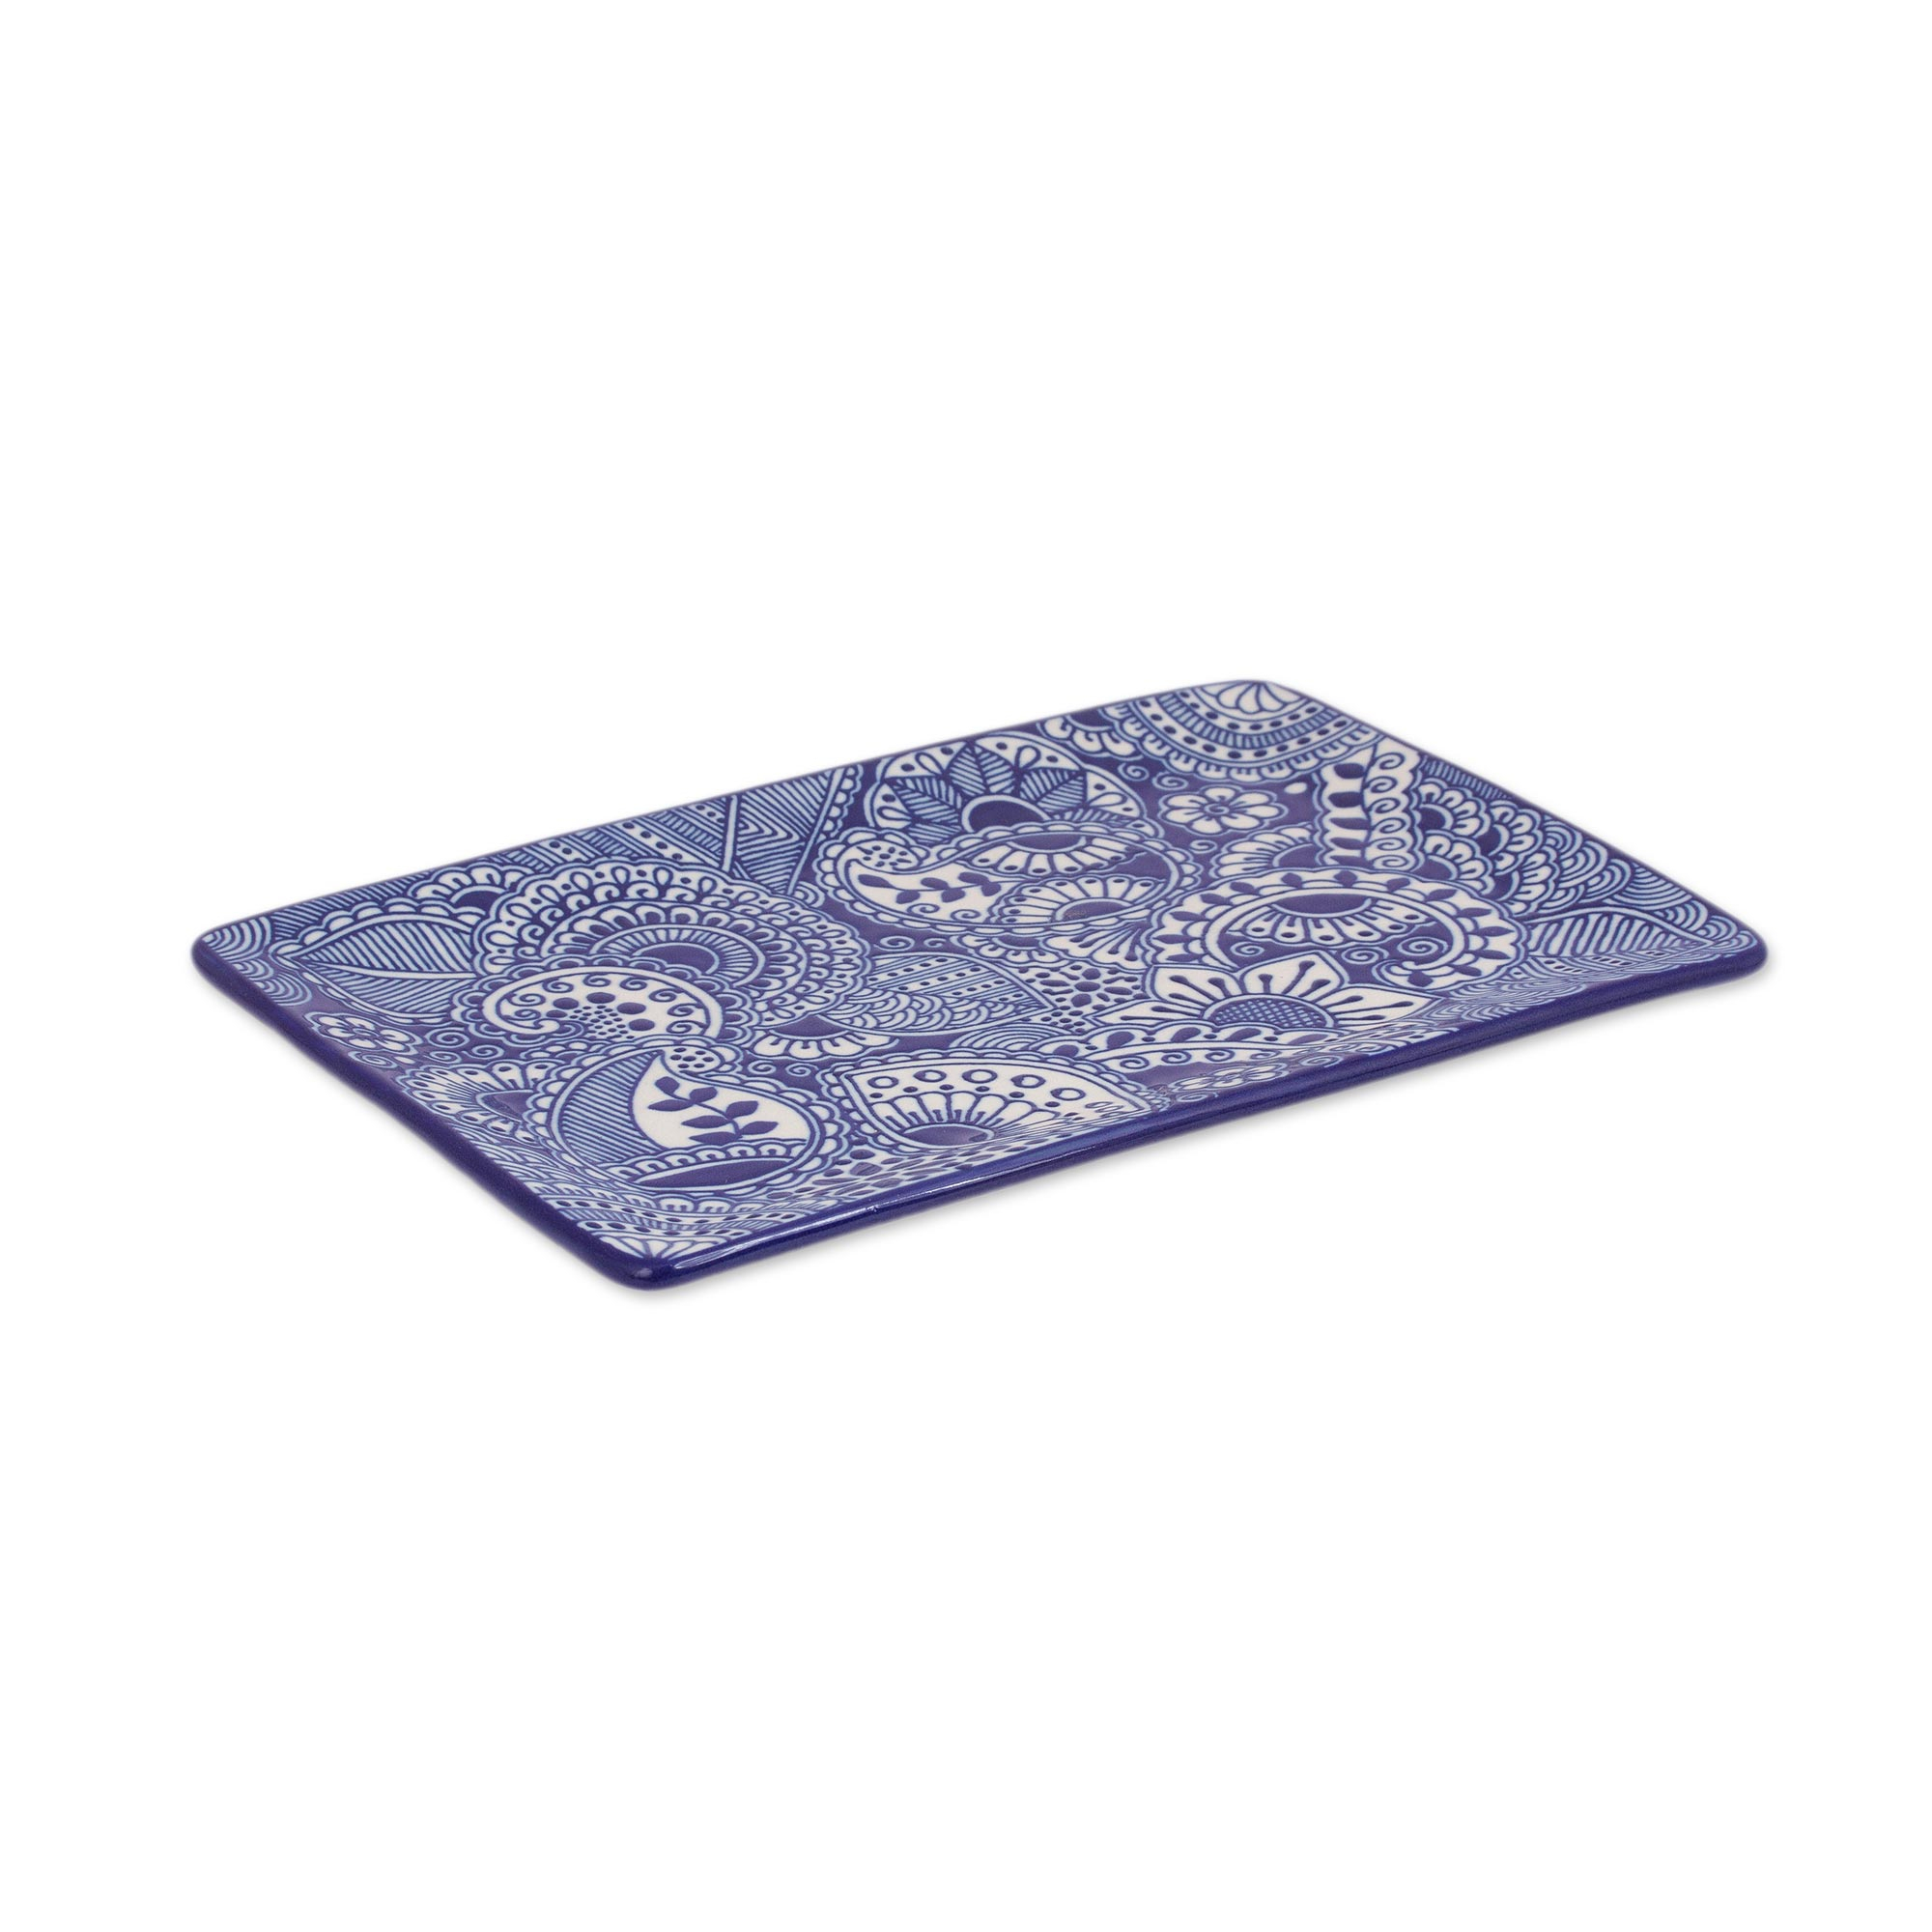 Handcrafted Rectangular Blue Floral and Paisley Ceramic Tray ...